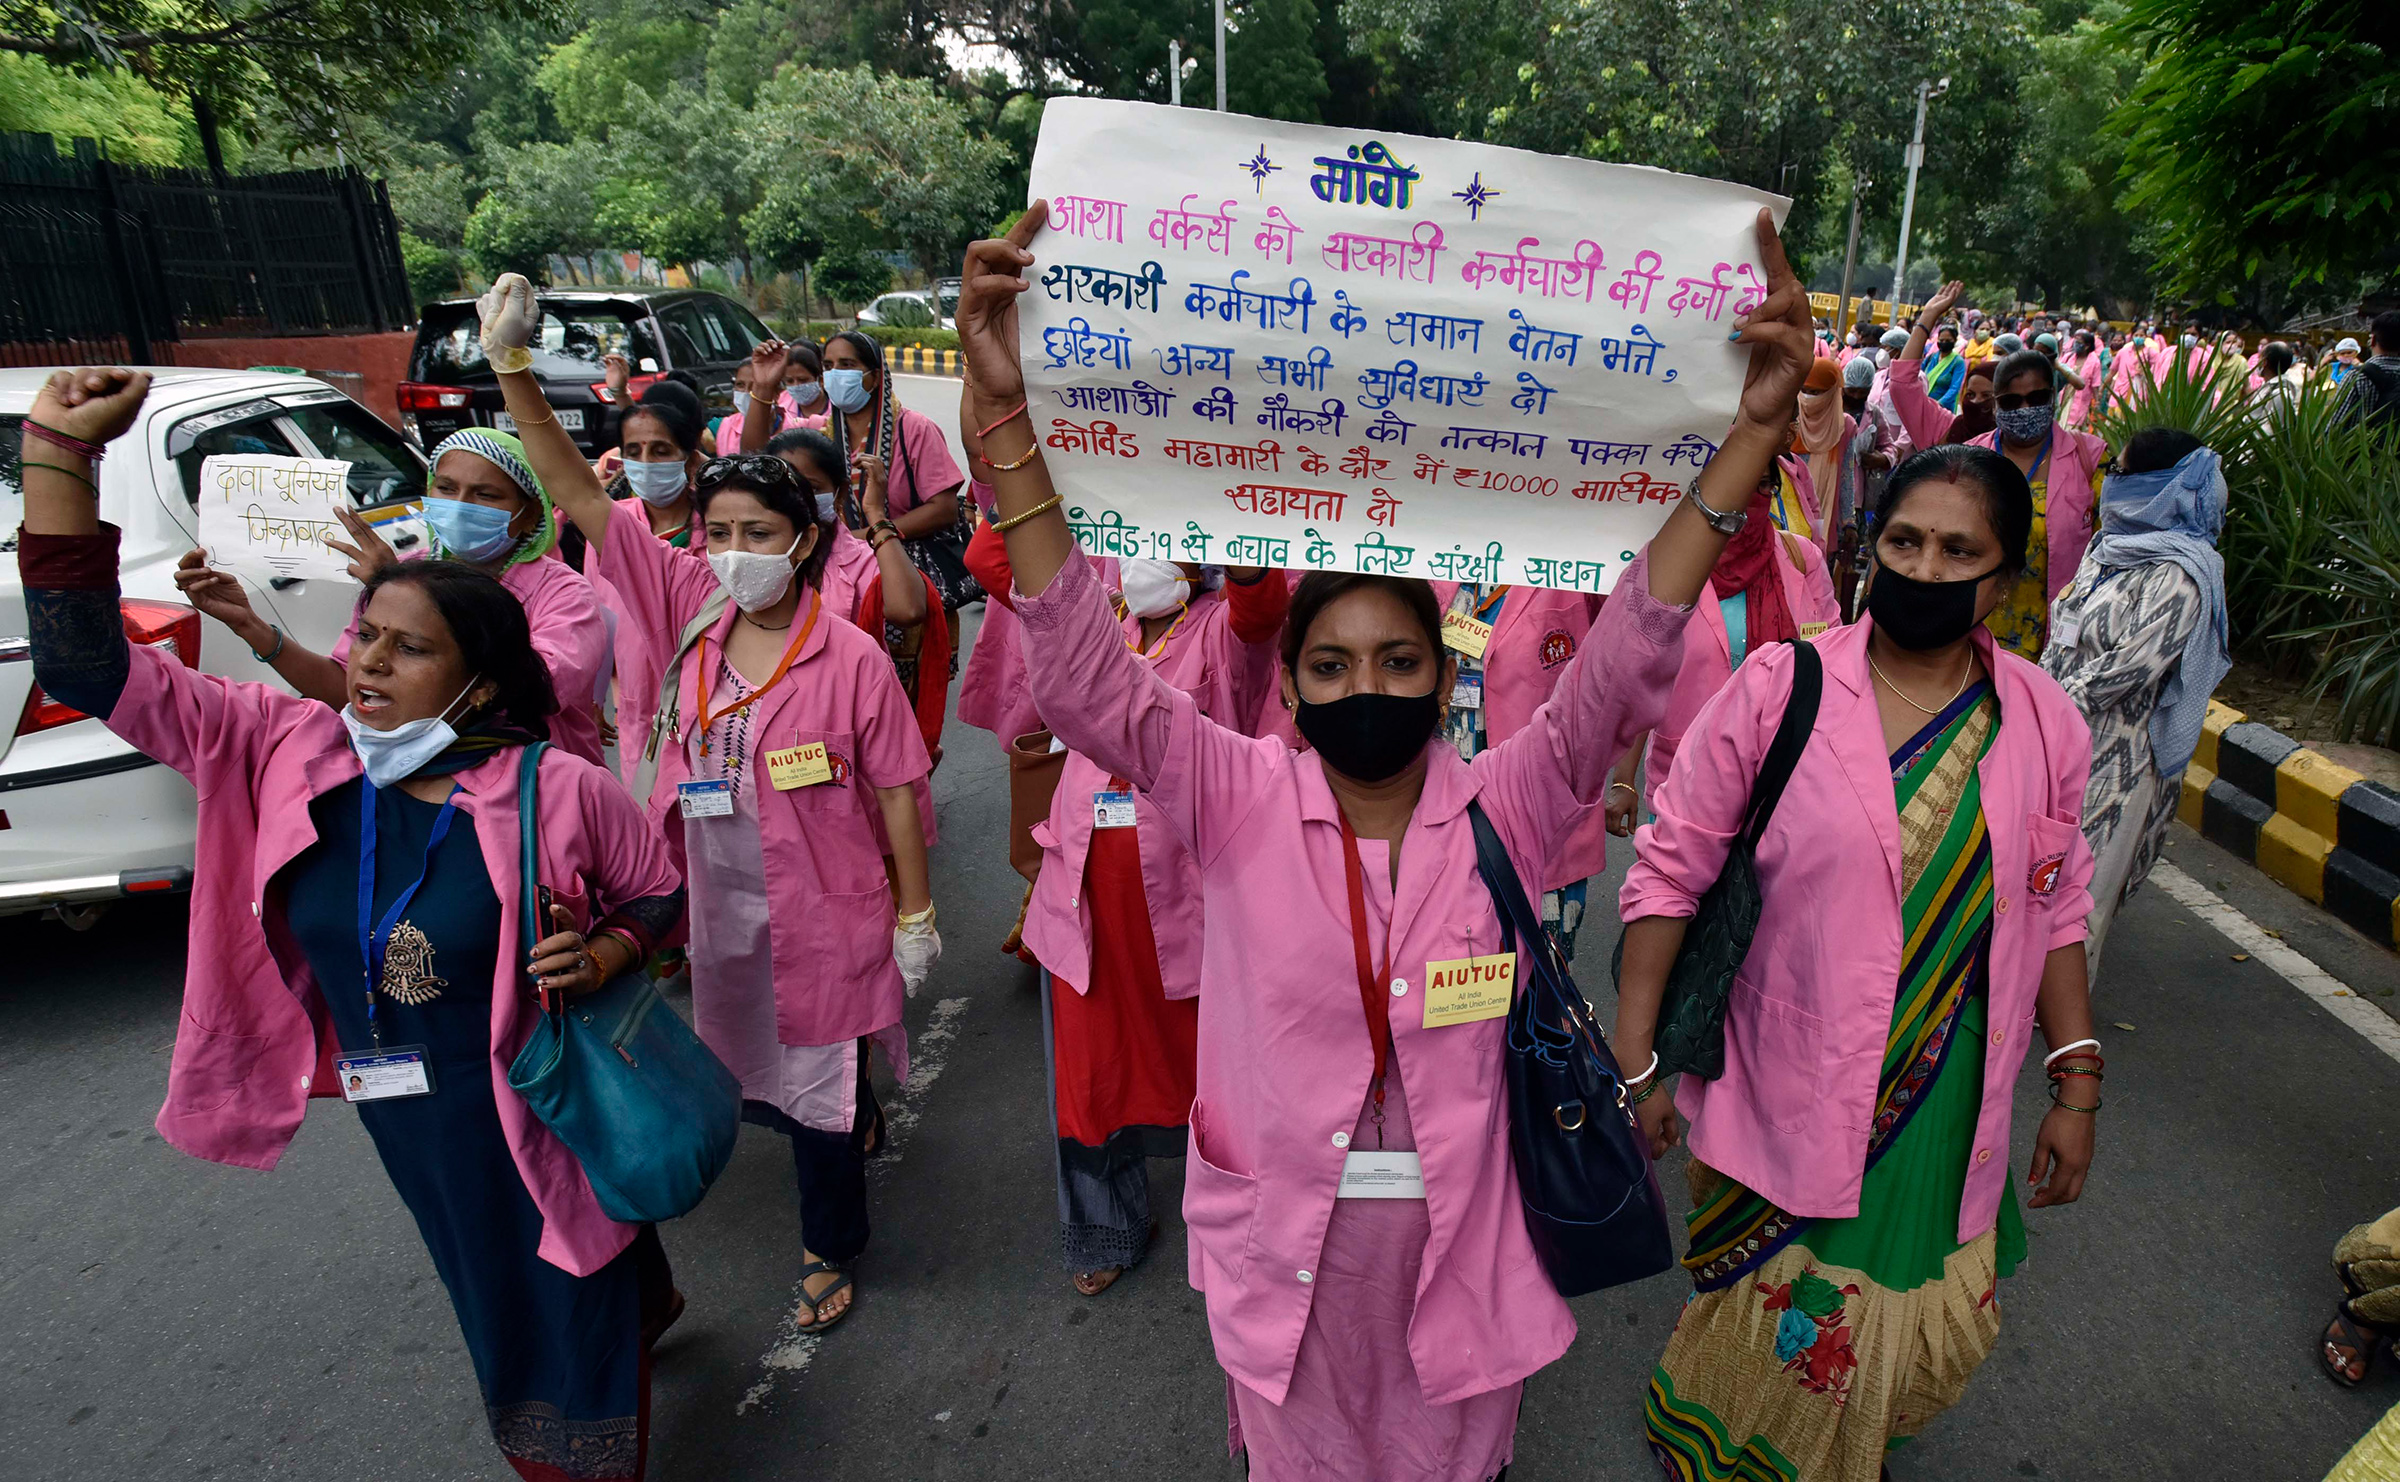 Accredited Social Health Activist (ASHA) workers protest against alleged negligence of their workforce by the government on August 9, 2020 in New Delhi. During the protest, ASHA workers demanded payment for their work during the COVID-19 pandemic, saying they have not been paid for the past few months. (Mohd Zakir—Hindustan Times/Getty Images)